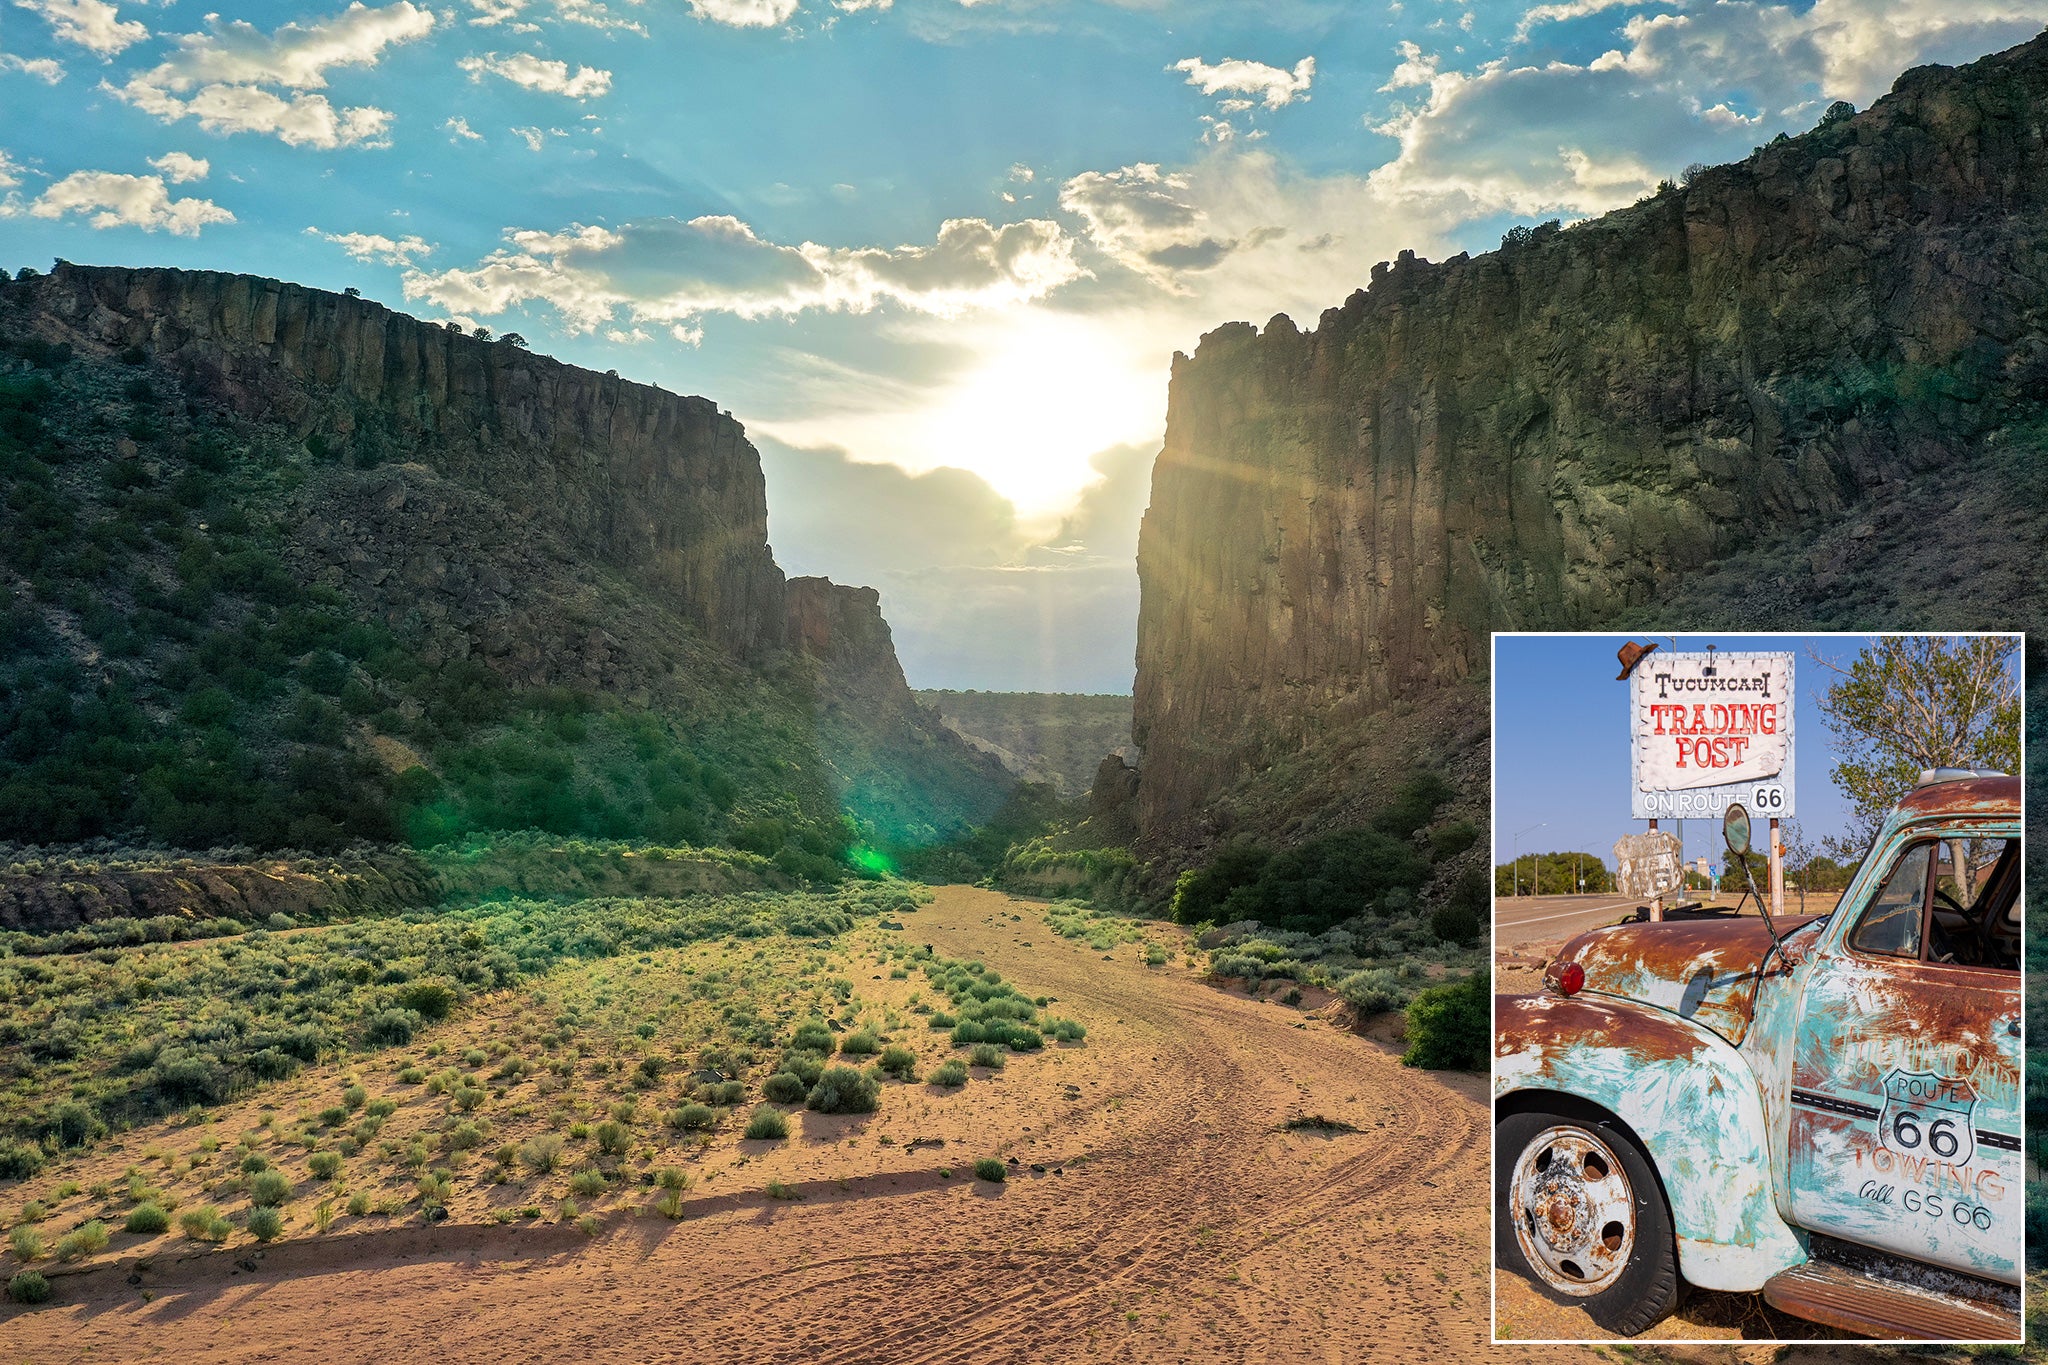 A state of contrasts: Sweeping canyons and historic highways